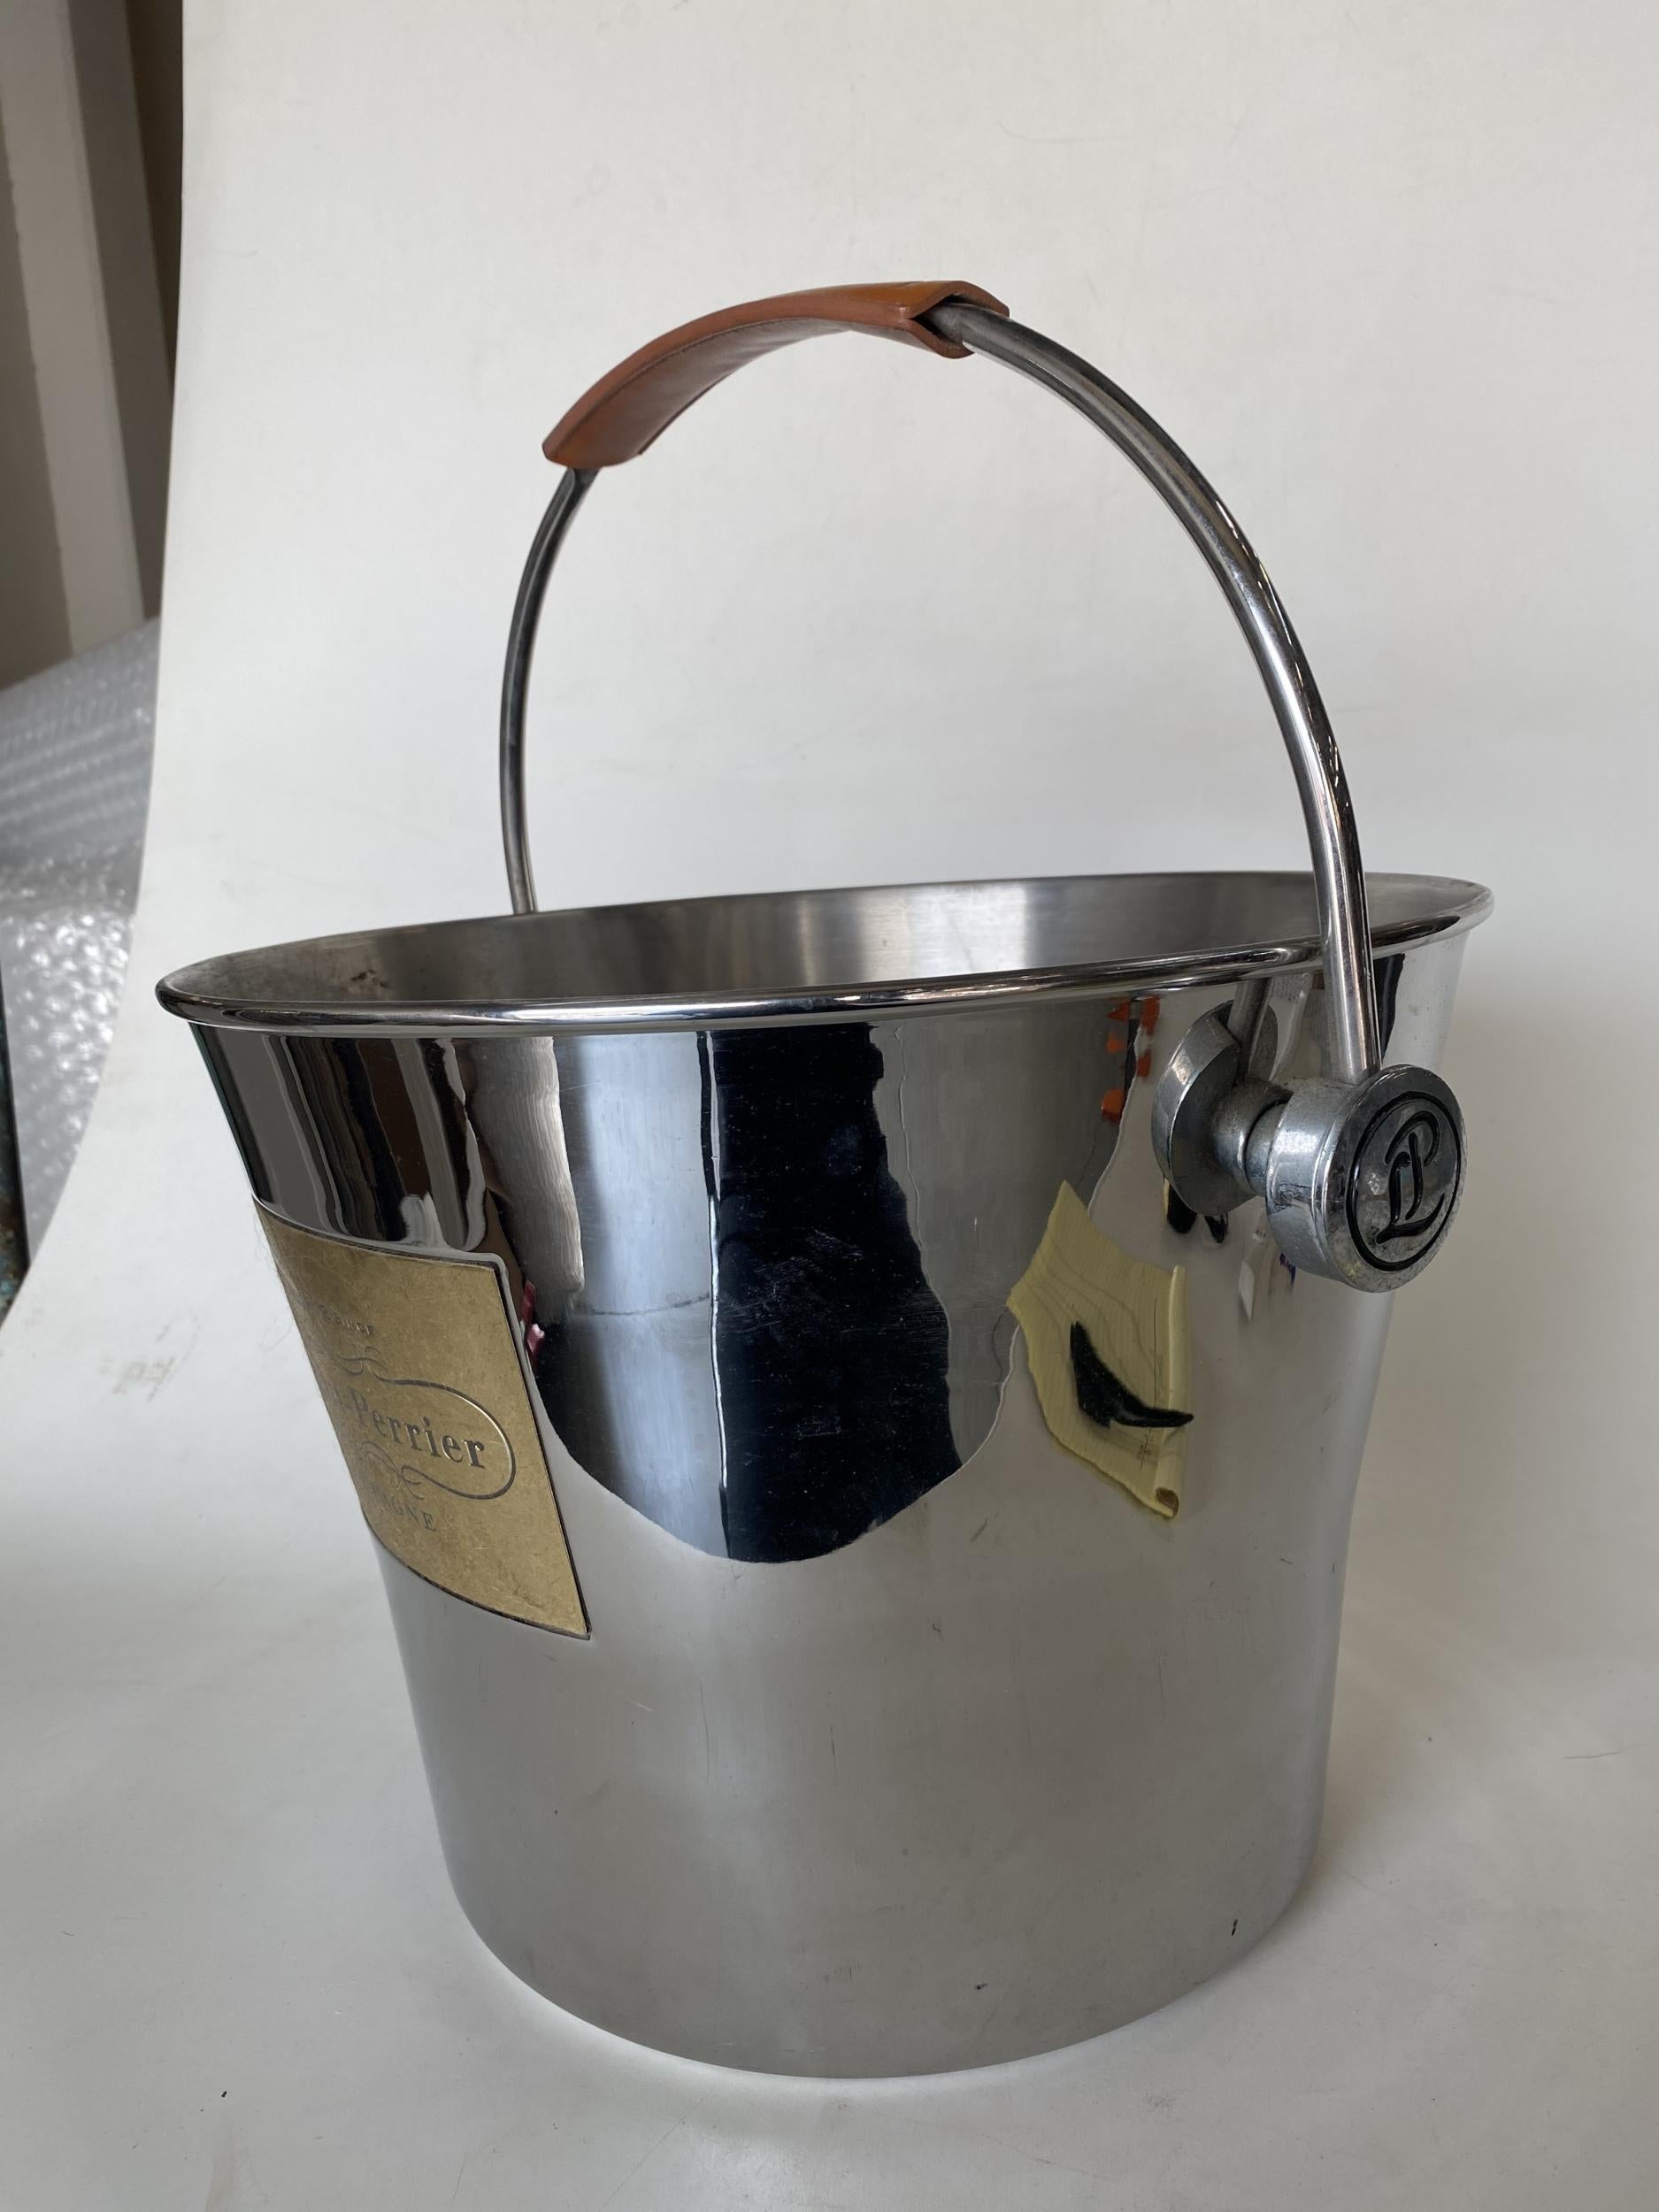 Original Laurent Perrier Champaign silver-tone stainless steel ice bucket with leather handle.